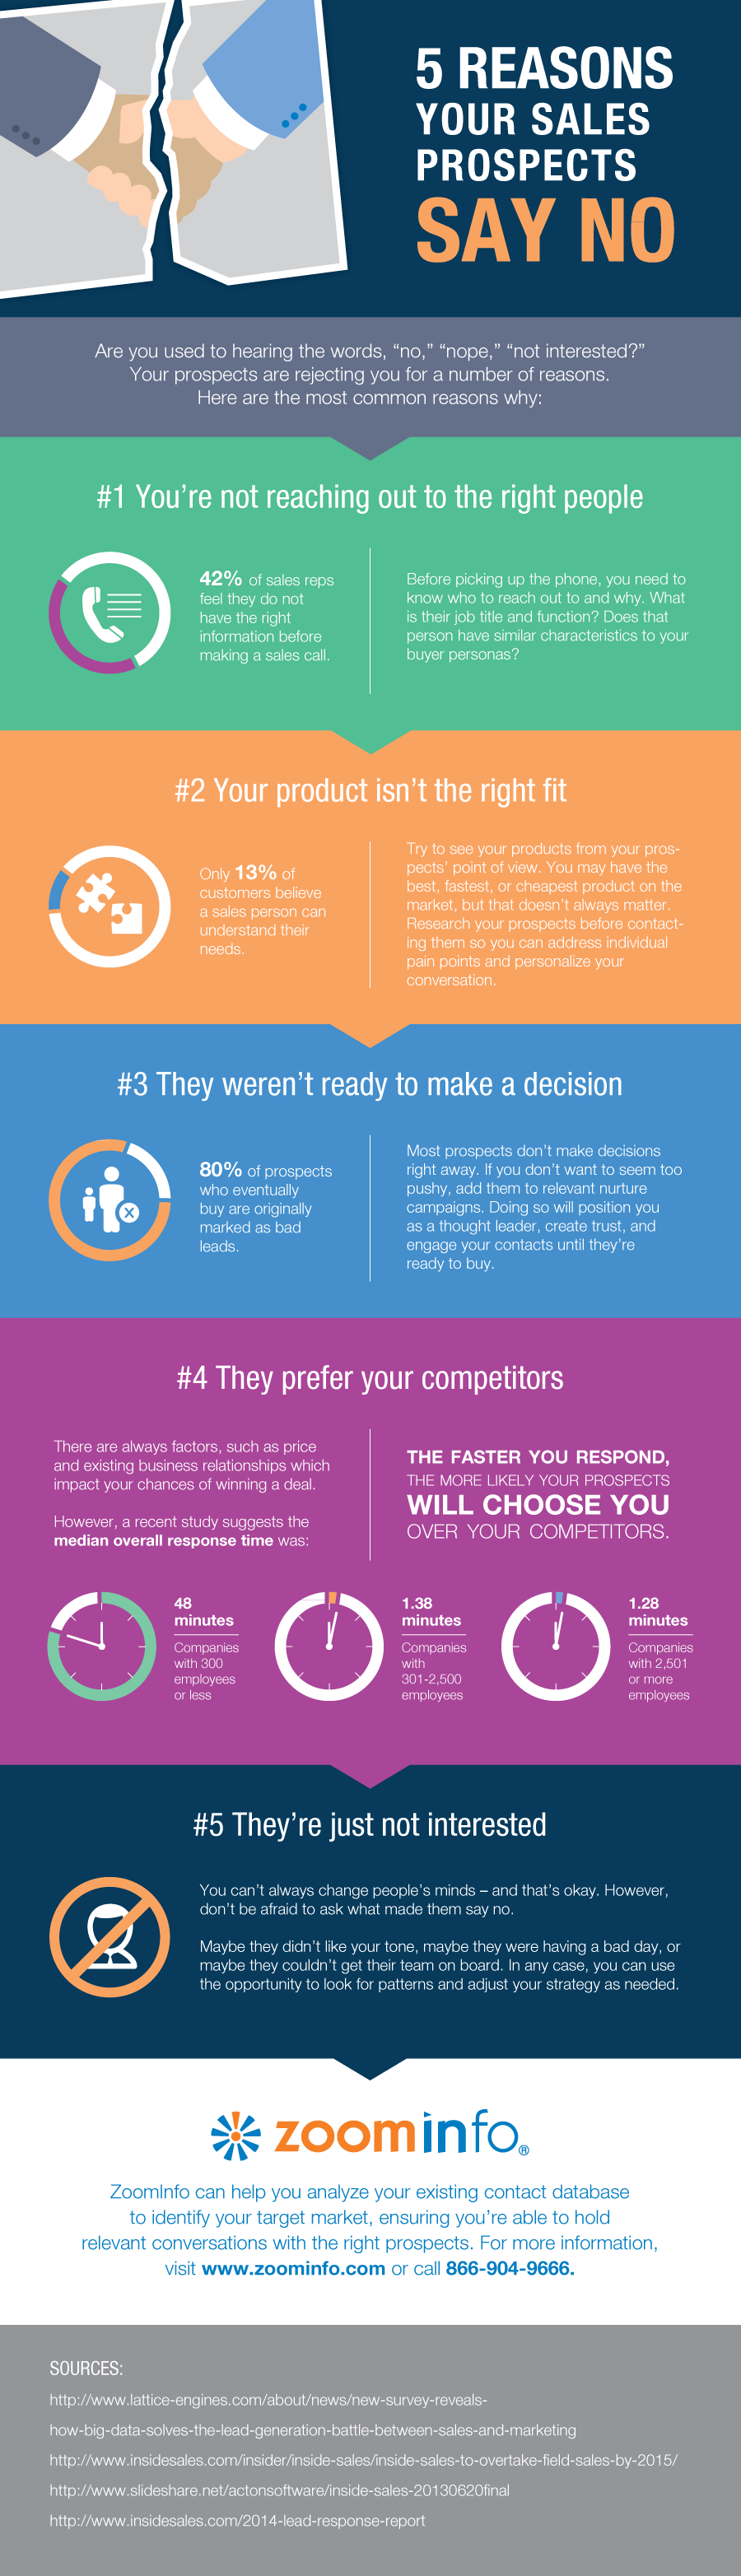 5 Reasons Prospects Say No Infographic